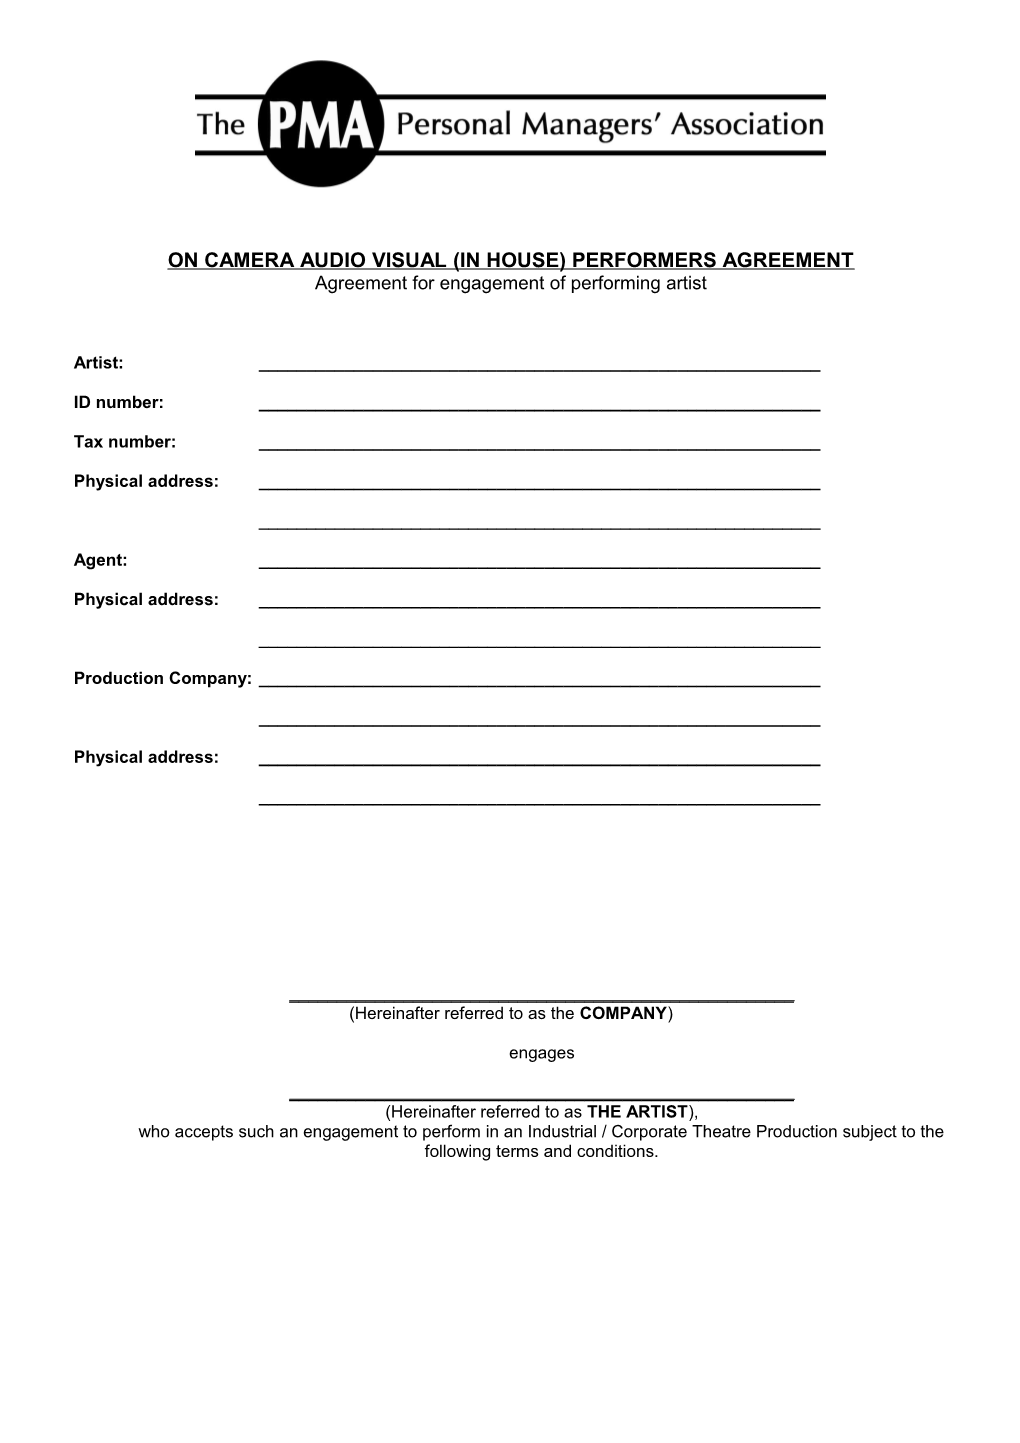 Agreement for Engagement of Performing Artist